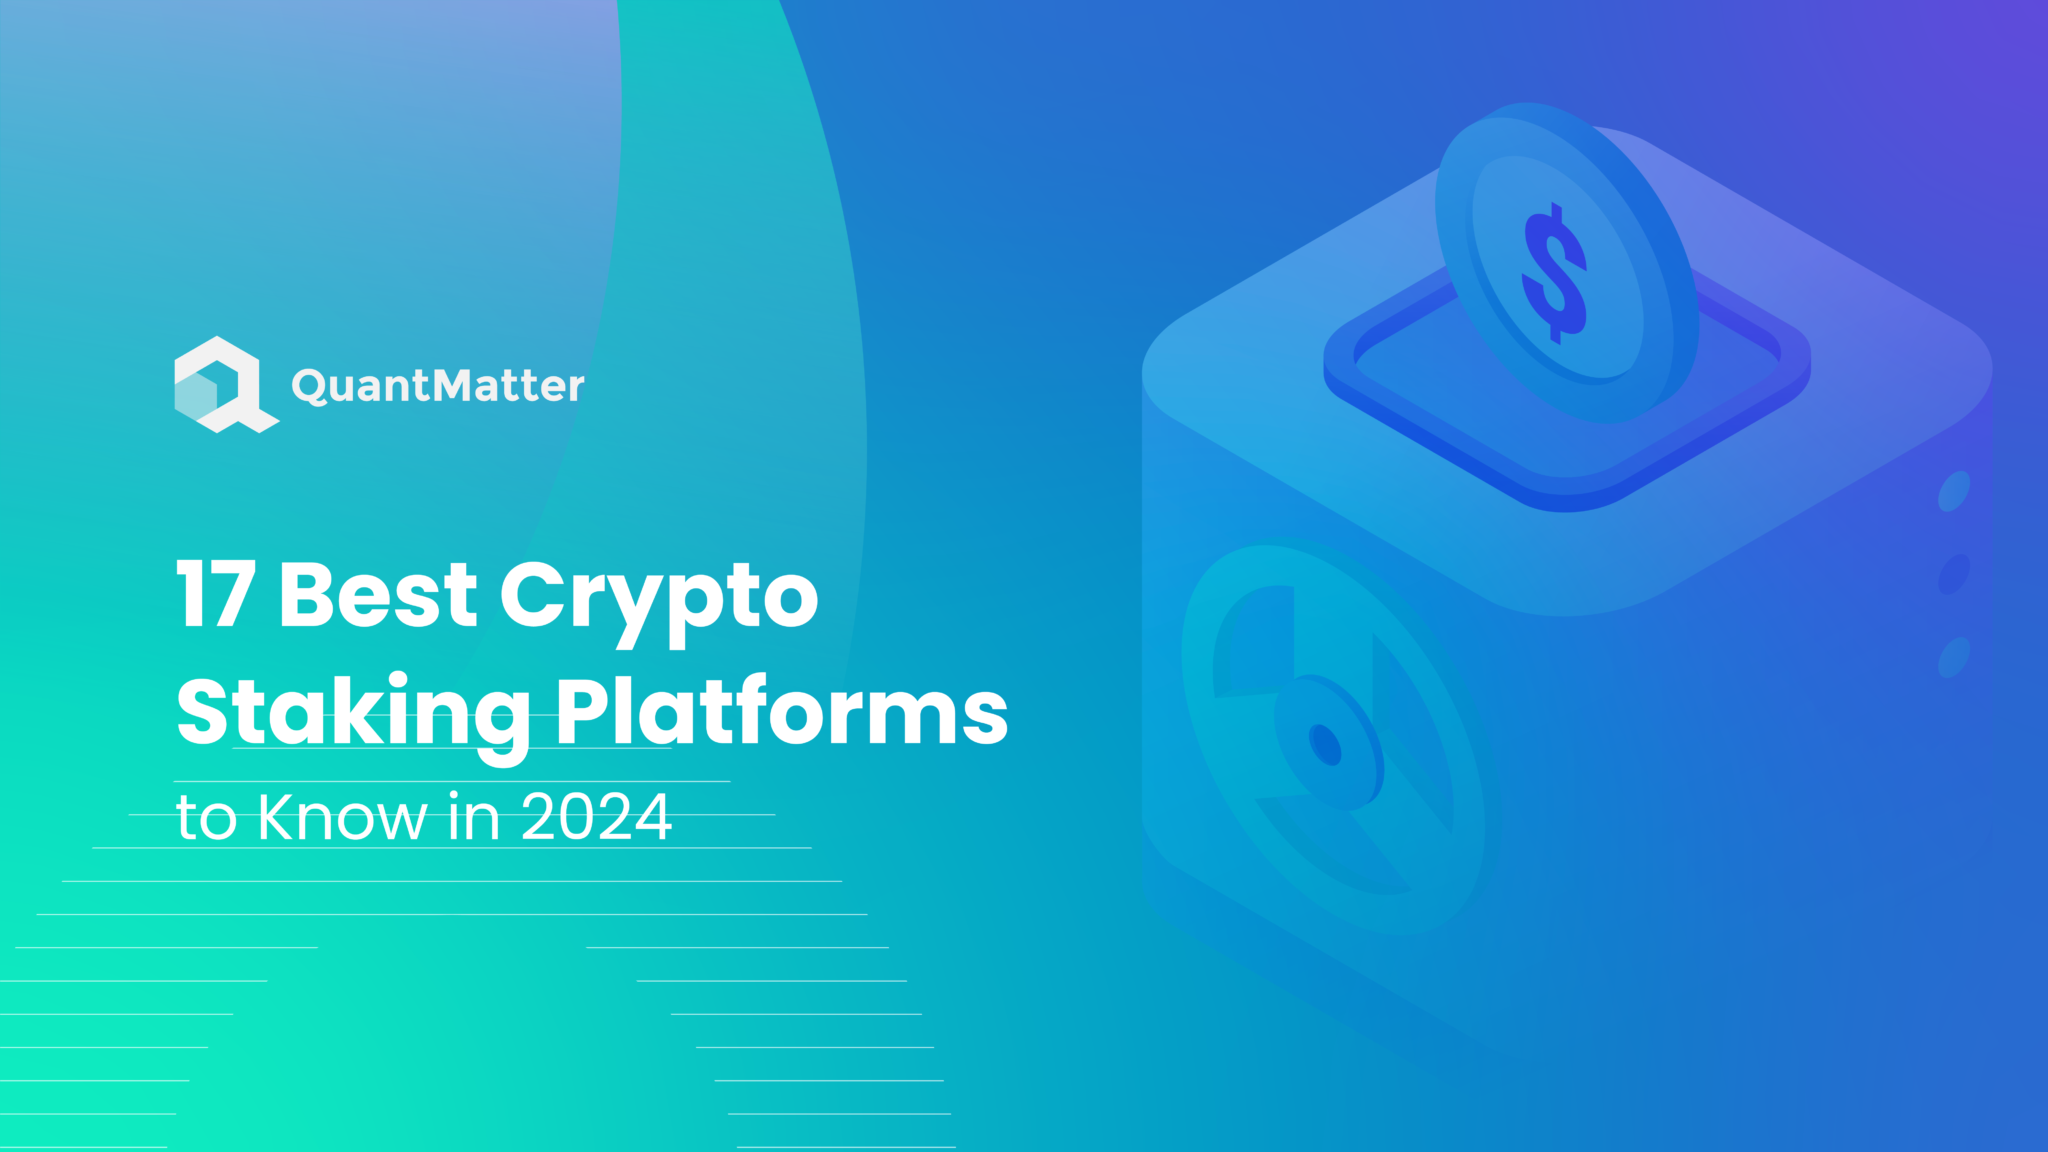 17 Best Crypto Staking Platforms to Know in 2024